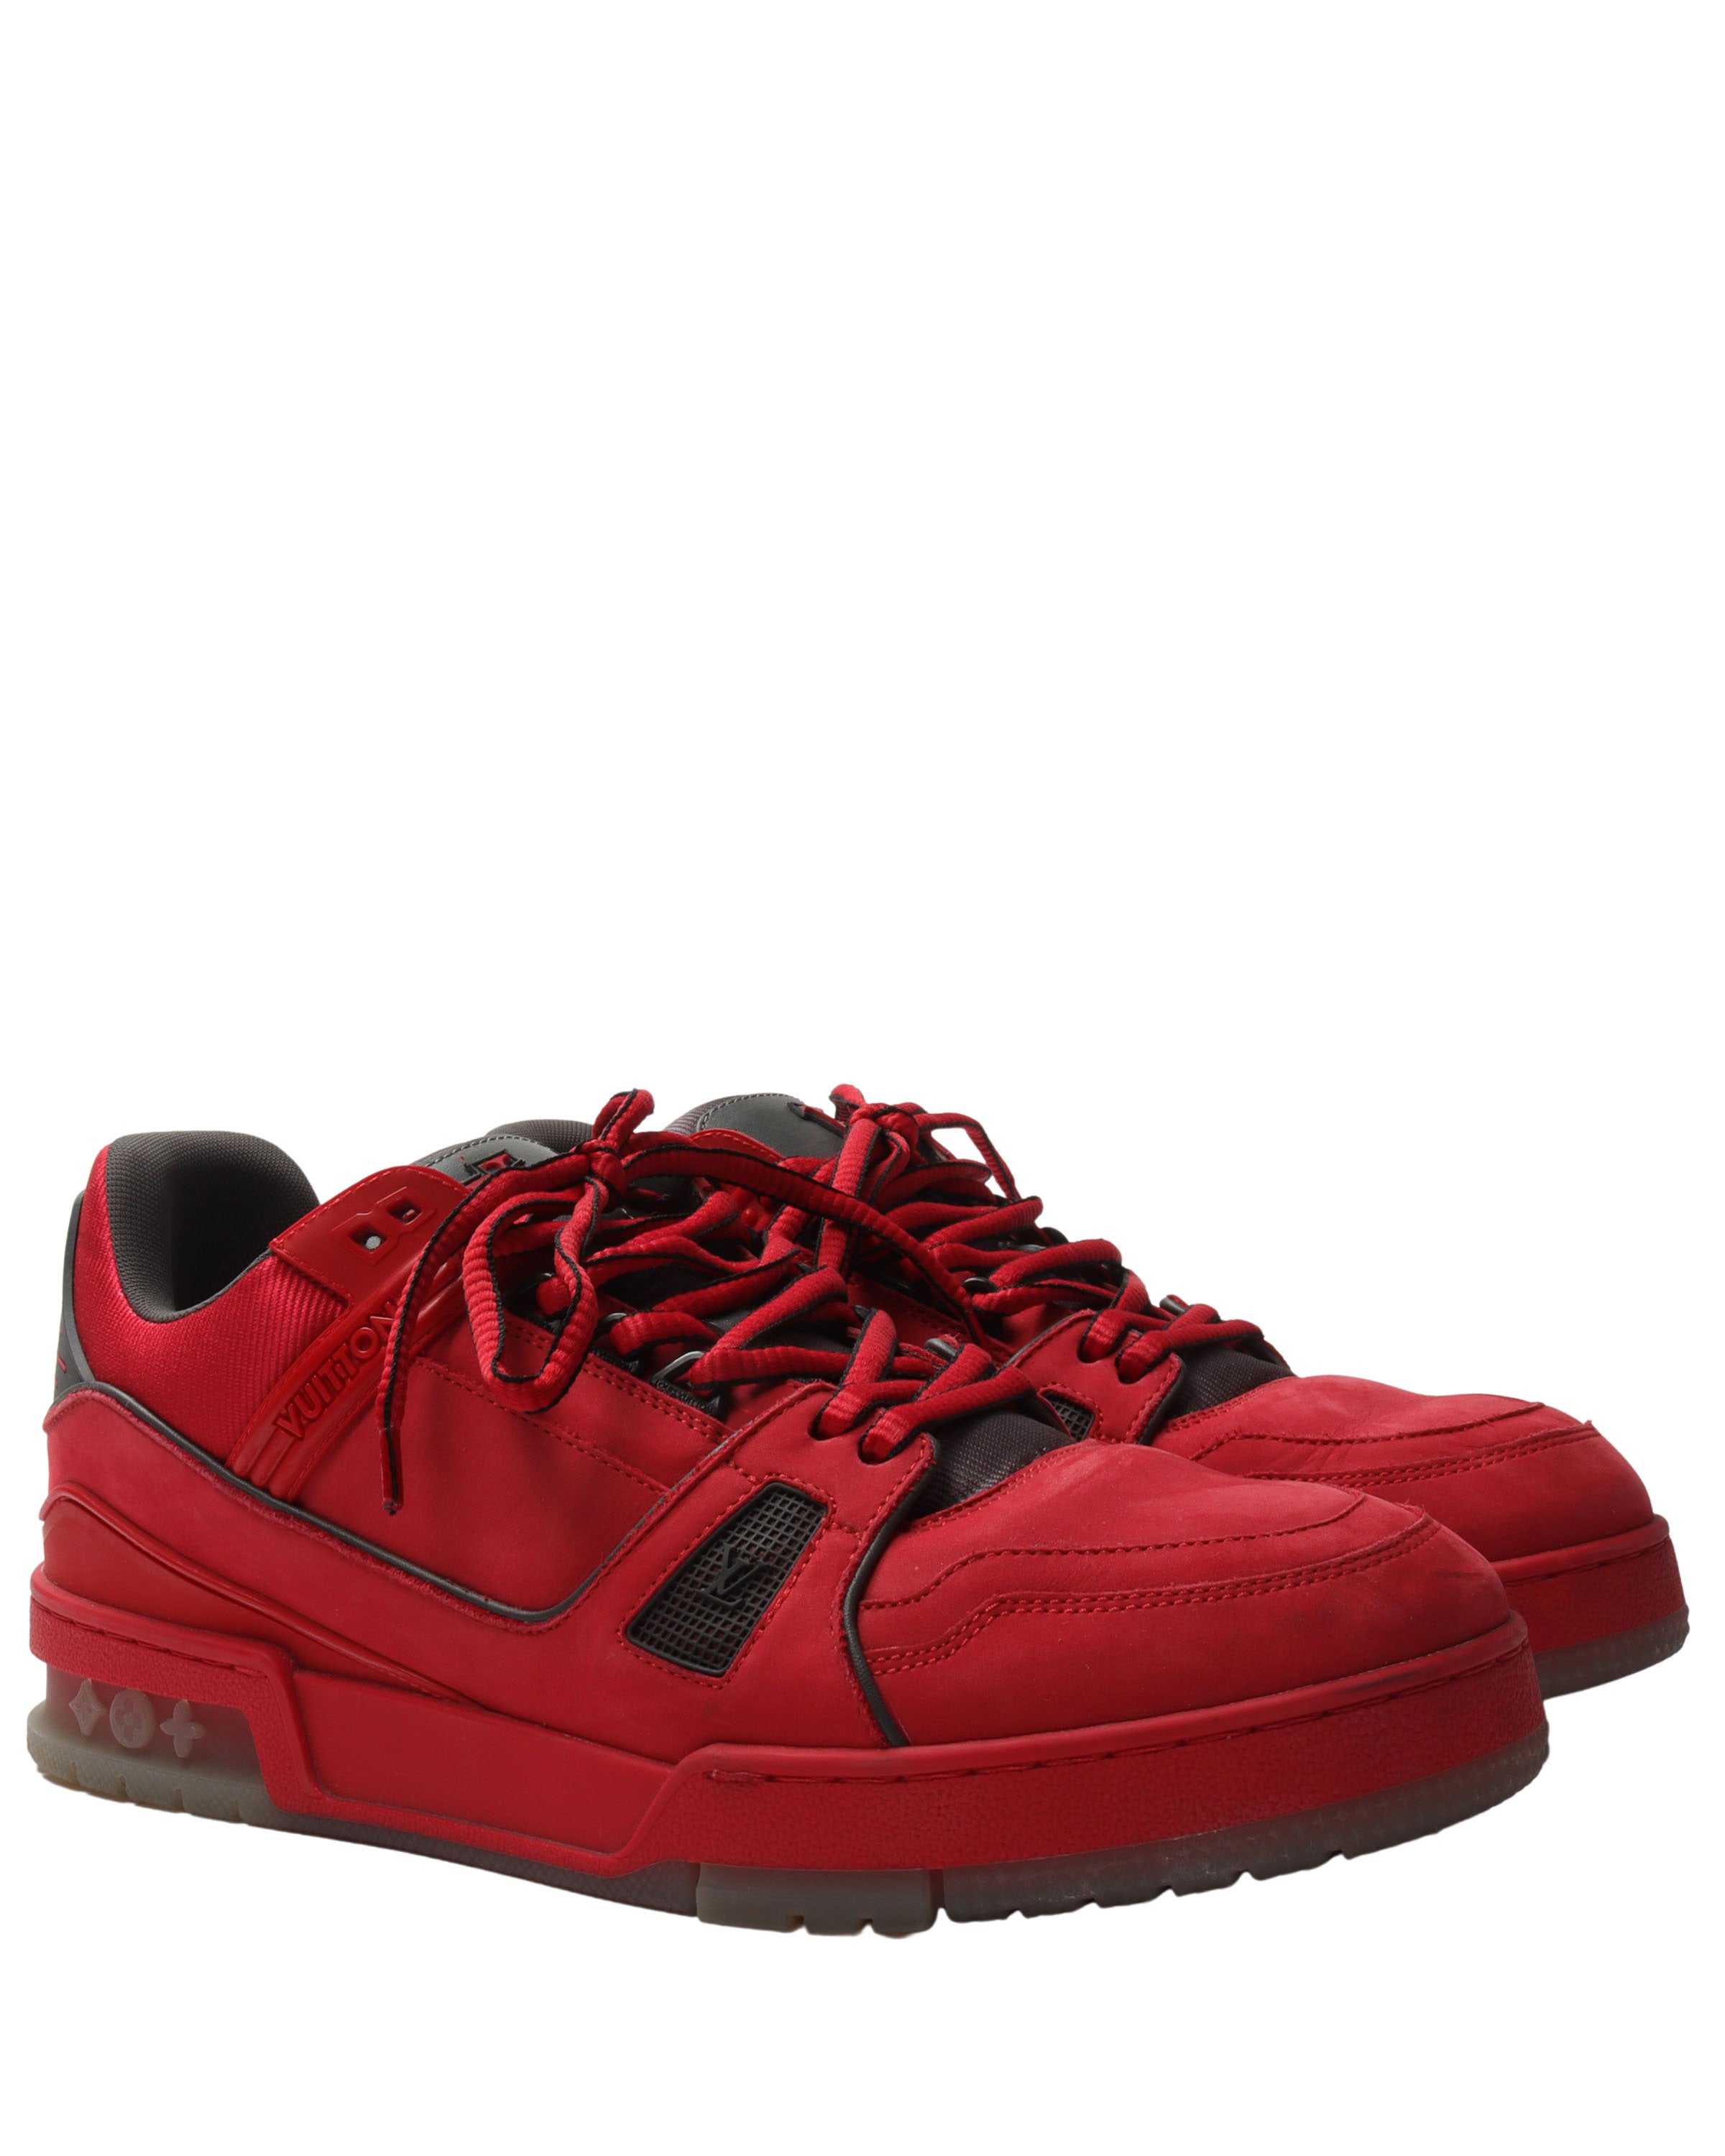 Louis Vuitton Red Sneakers Shoes - 6 For Sale on 1stDibs